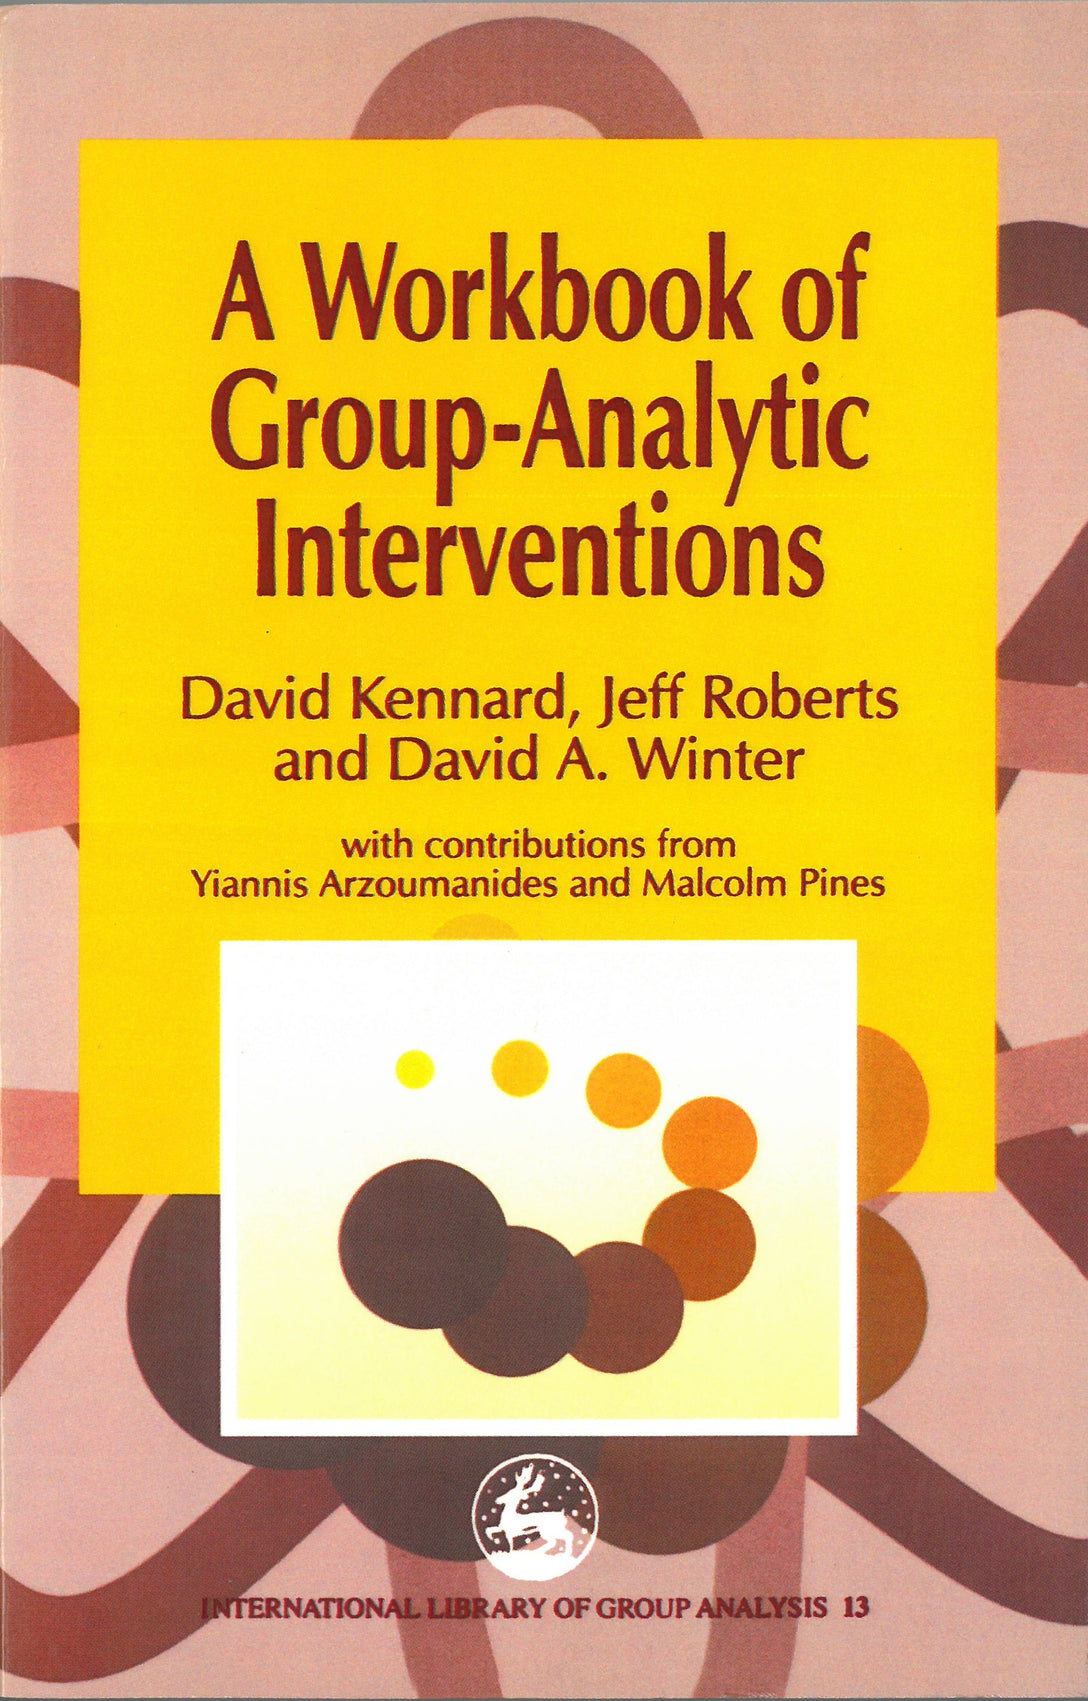 A Workbook of Group-Analytic Interventions by David Kennard, David A. Winter, Jeff Roberts